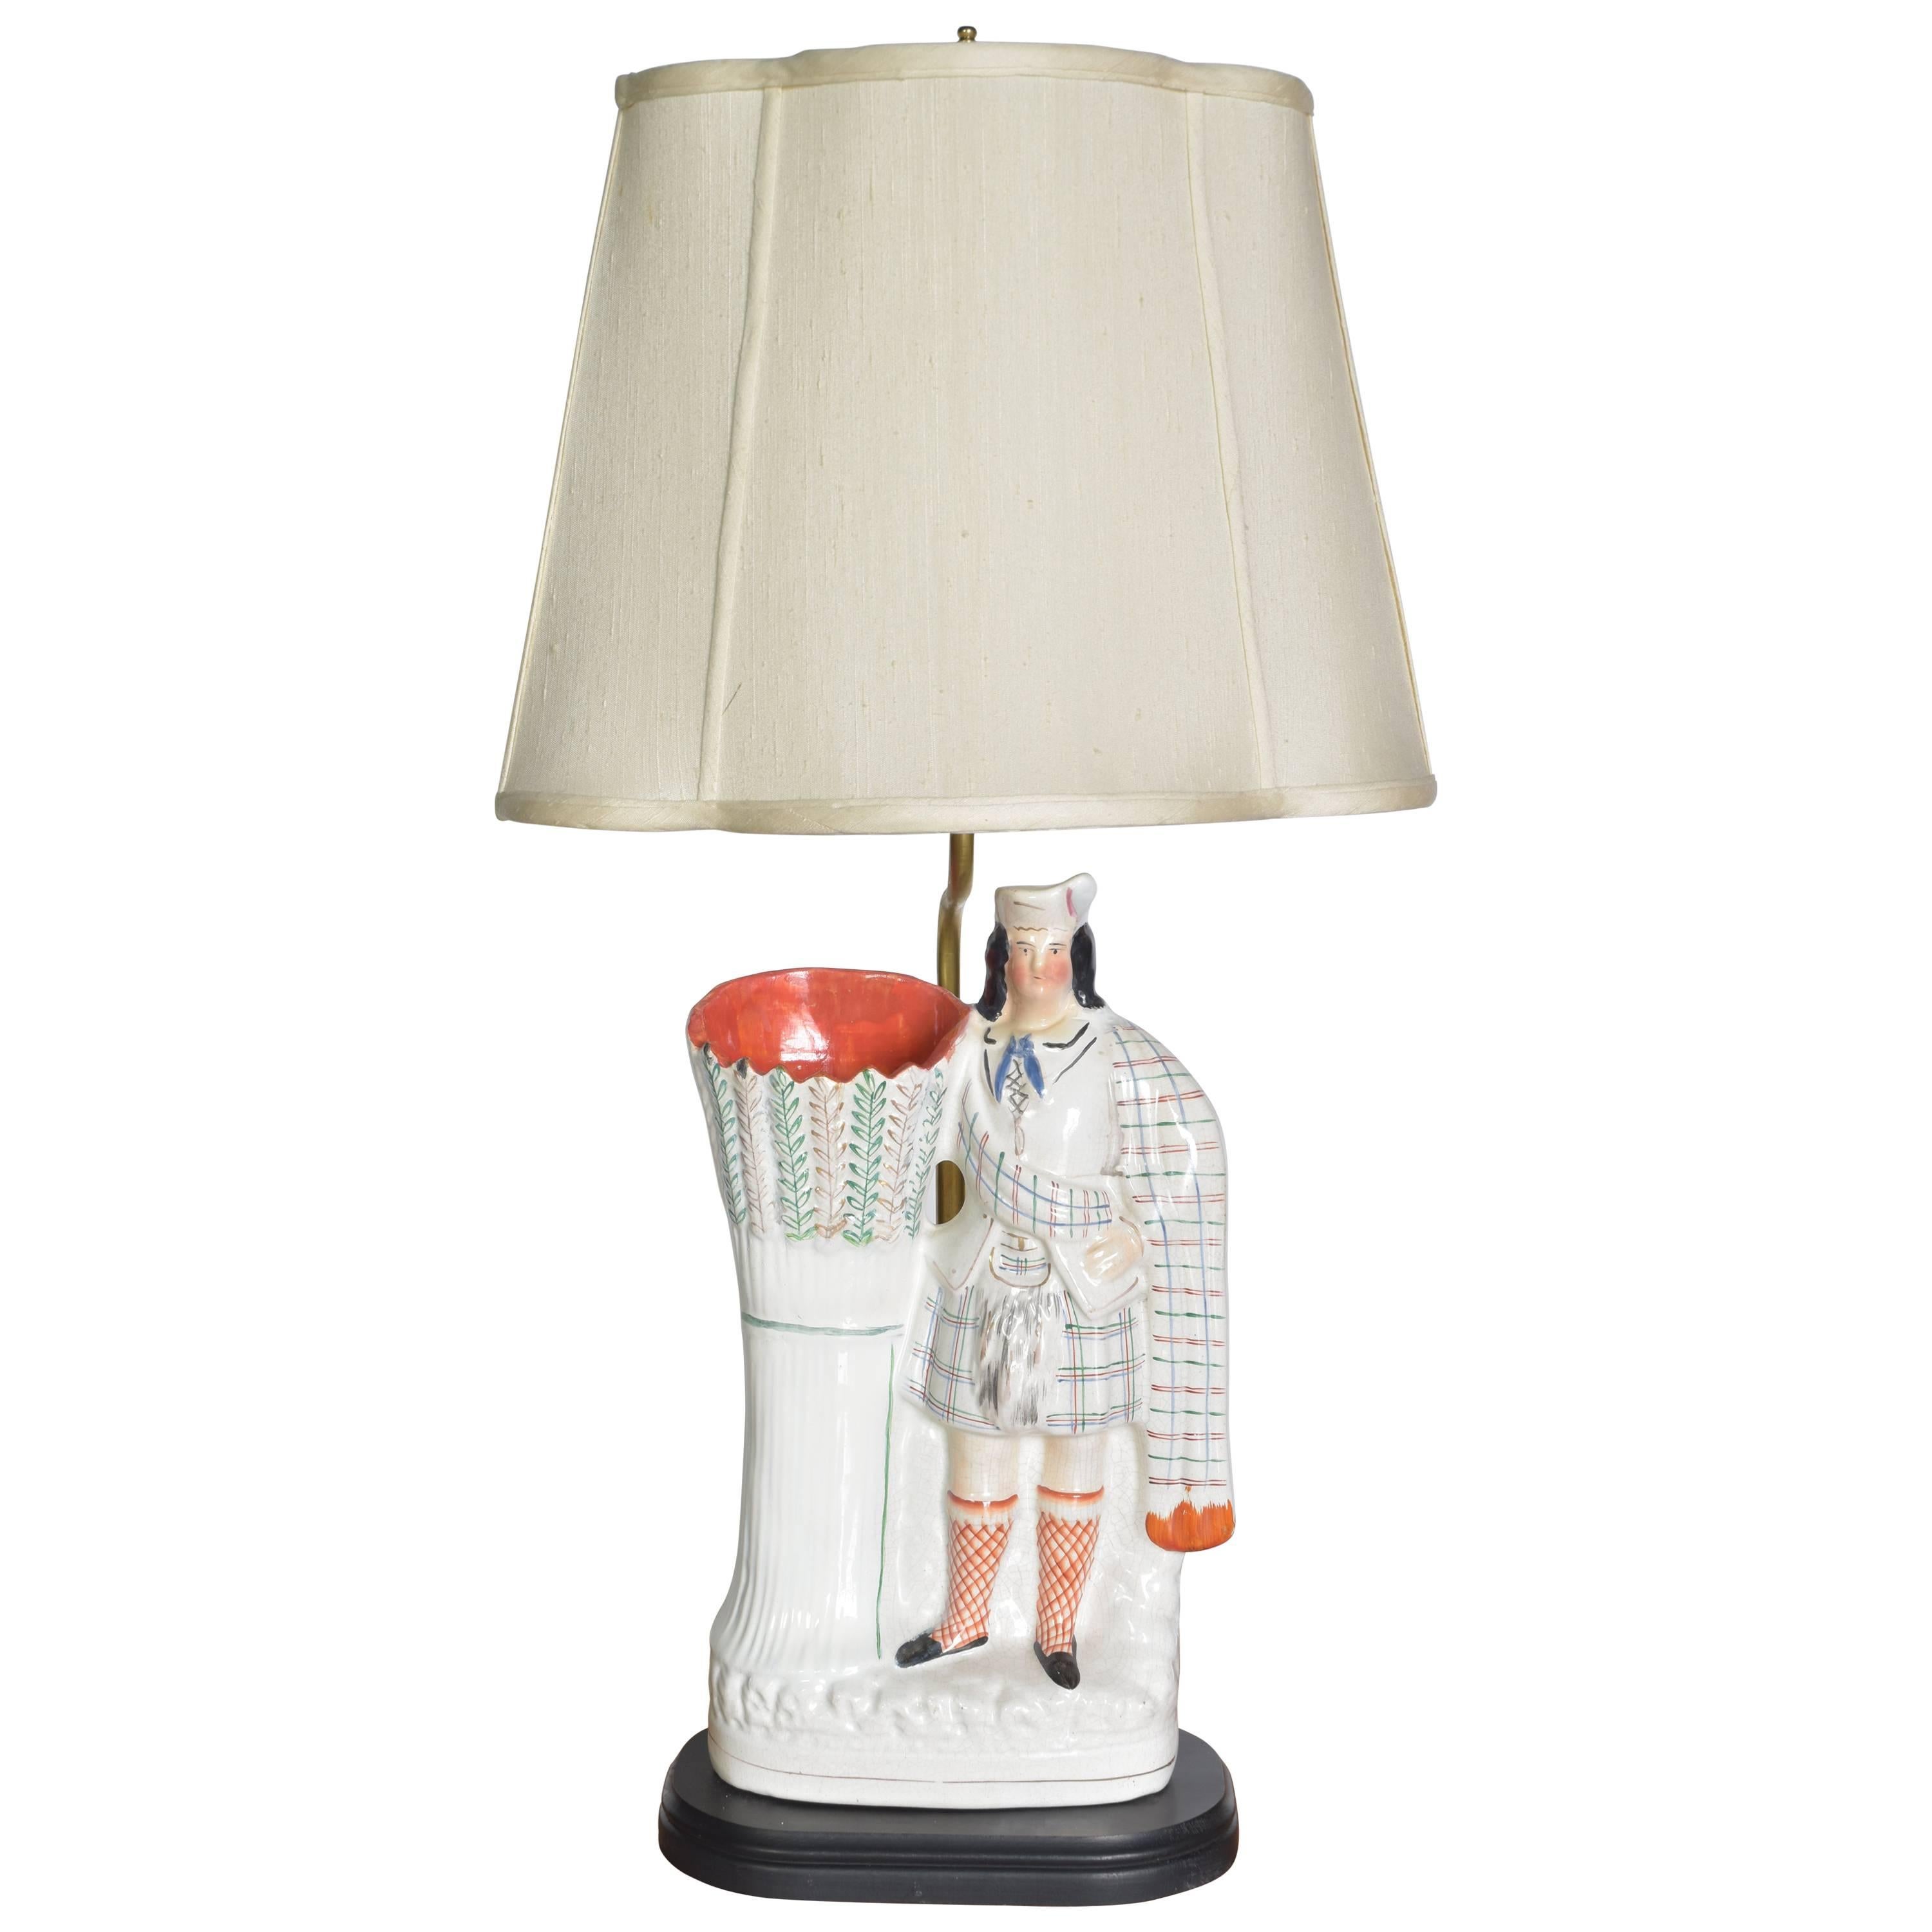 Staffordshire Figure as a Lamp For Sale